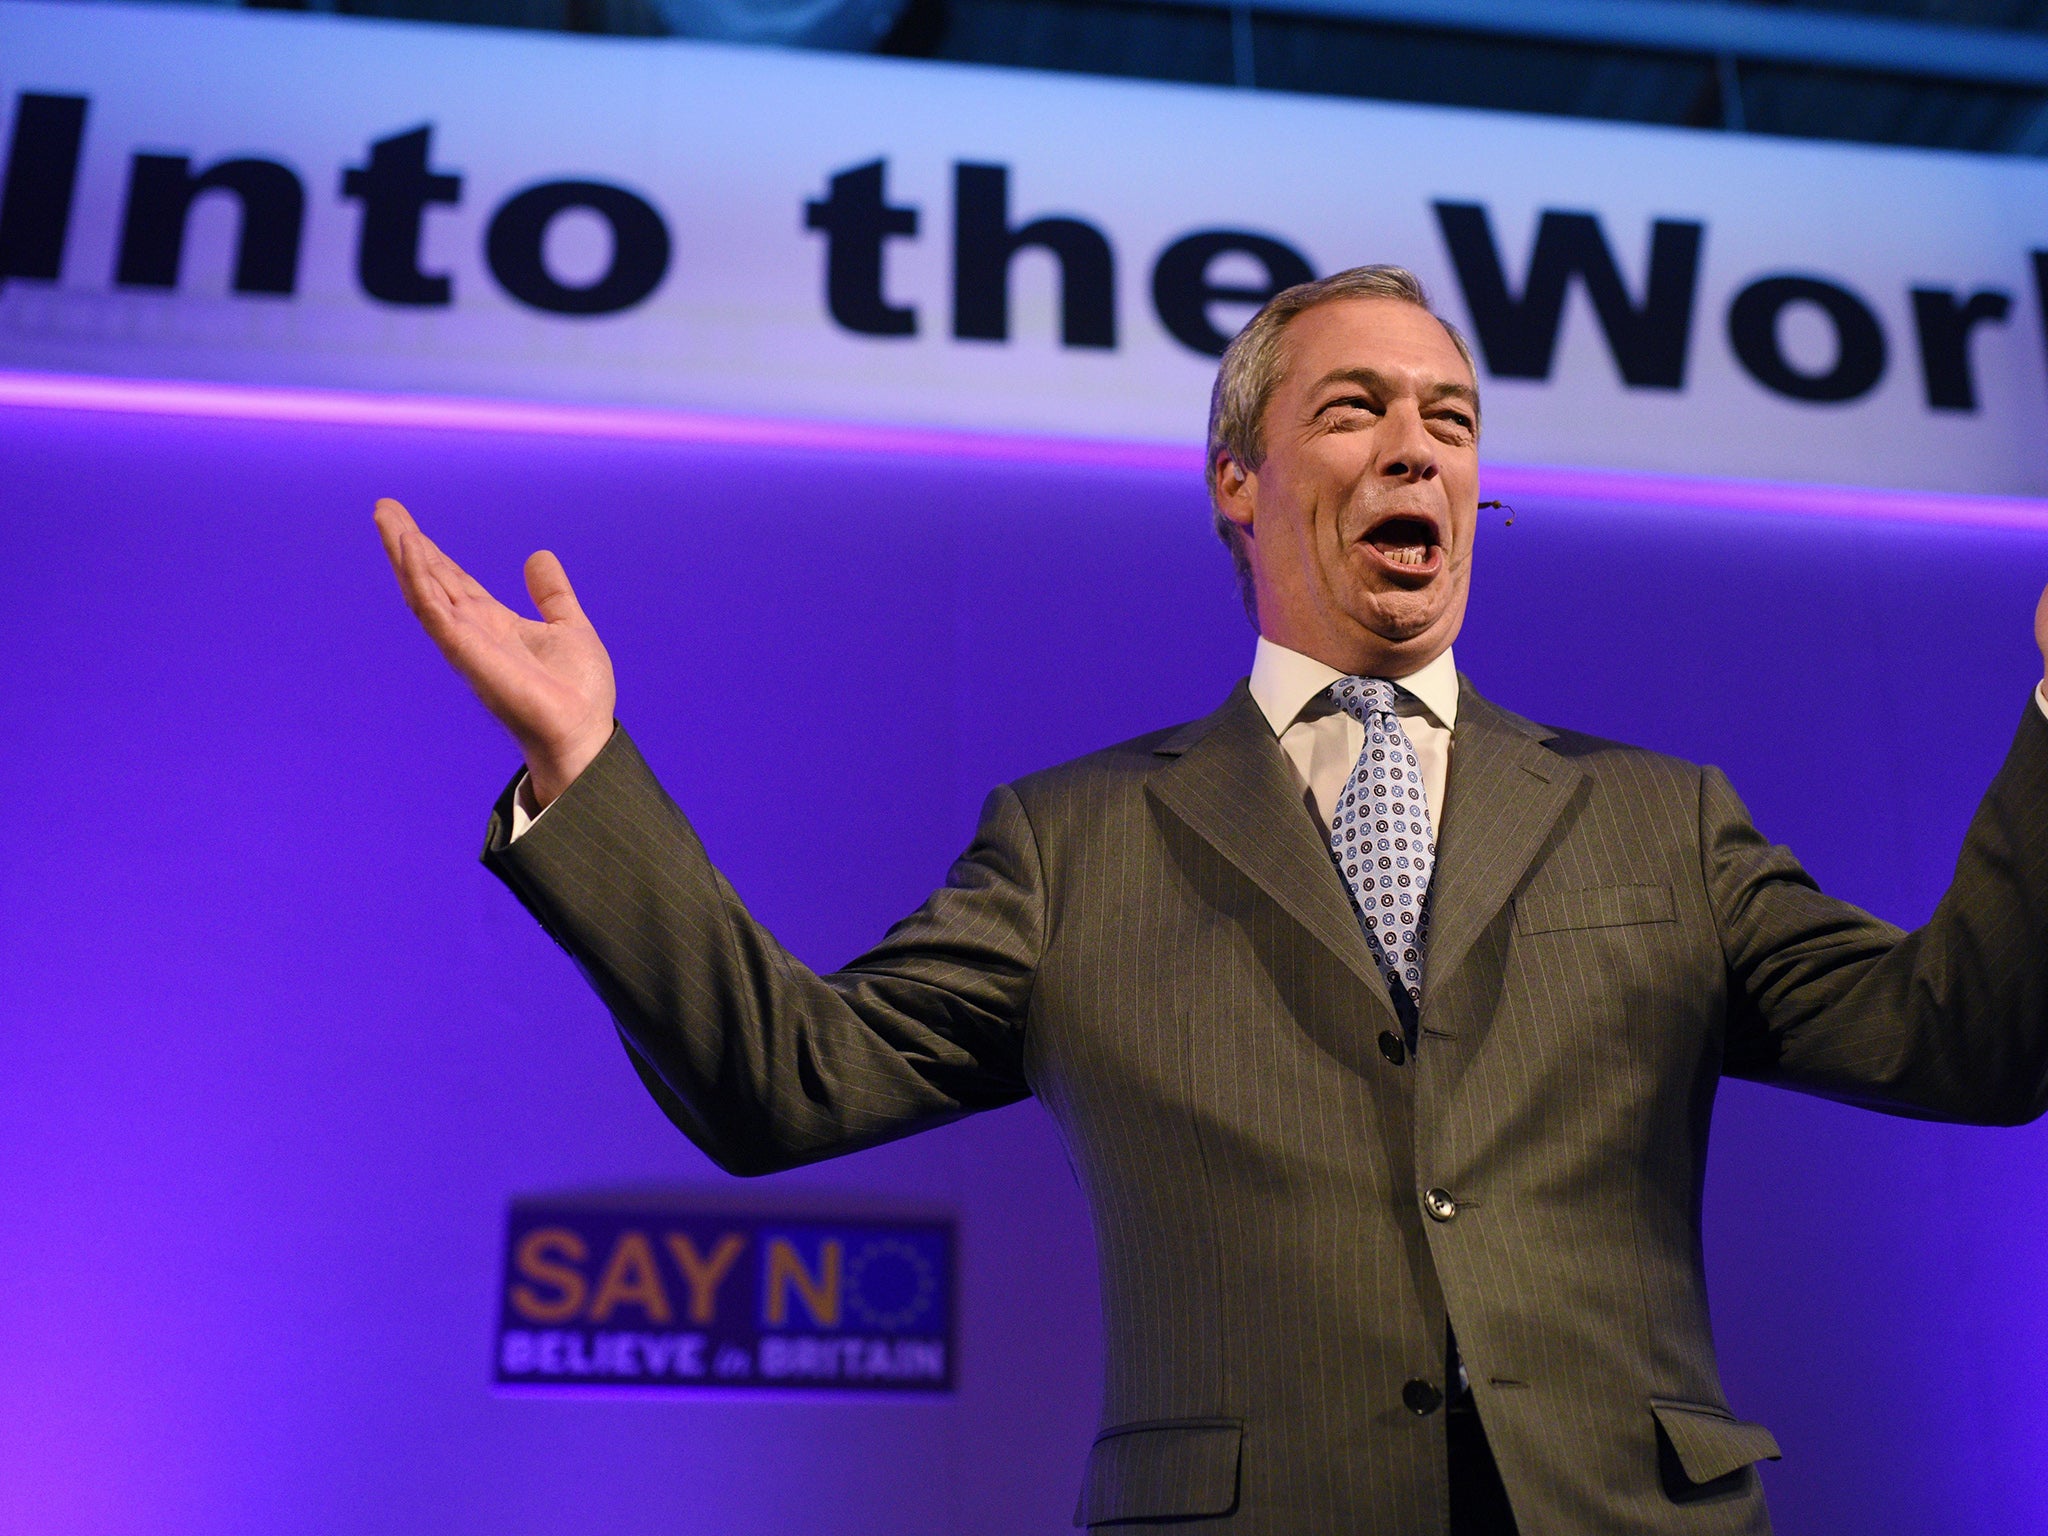 Nigel Farage has resigned as Ukip leader but has not stepped down from his role in the European parliament